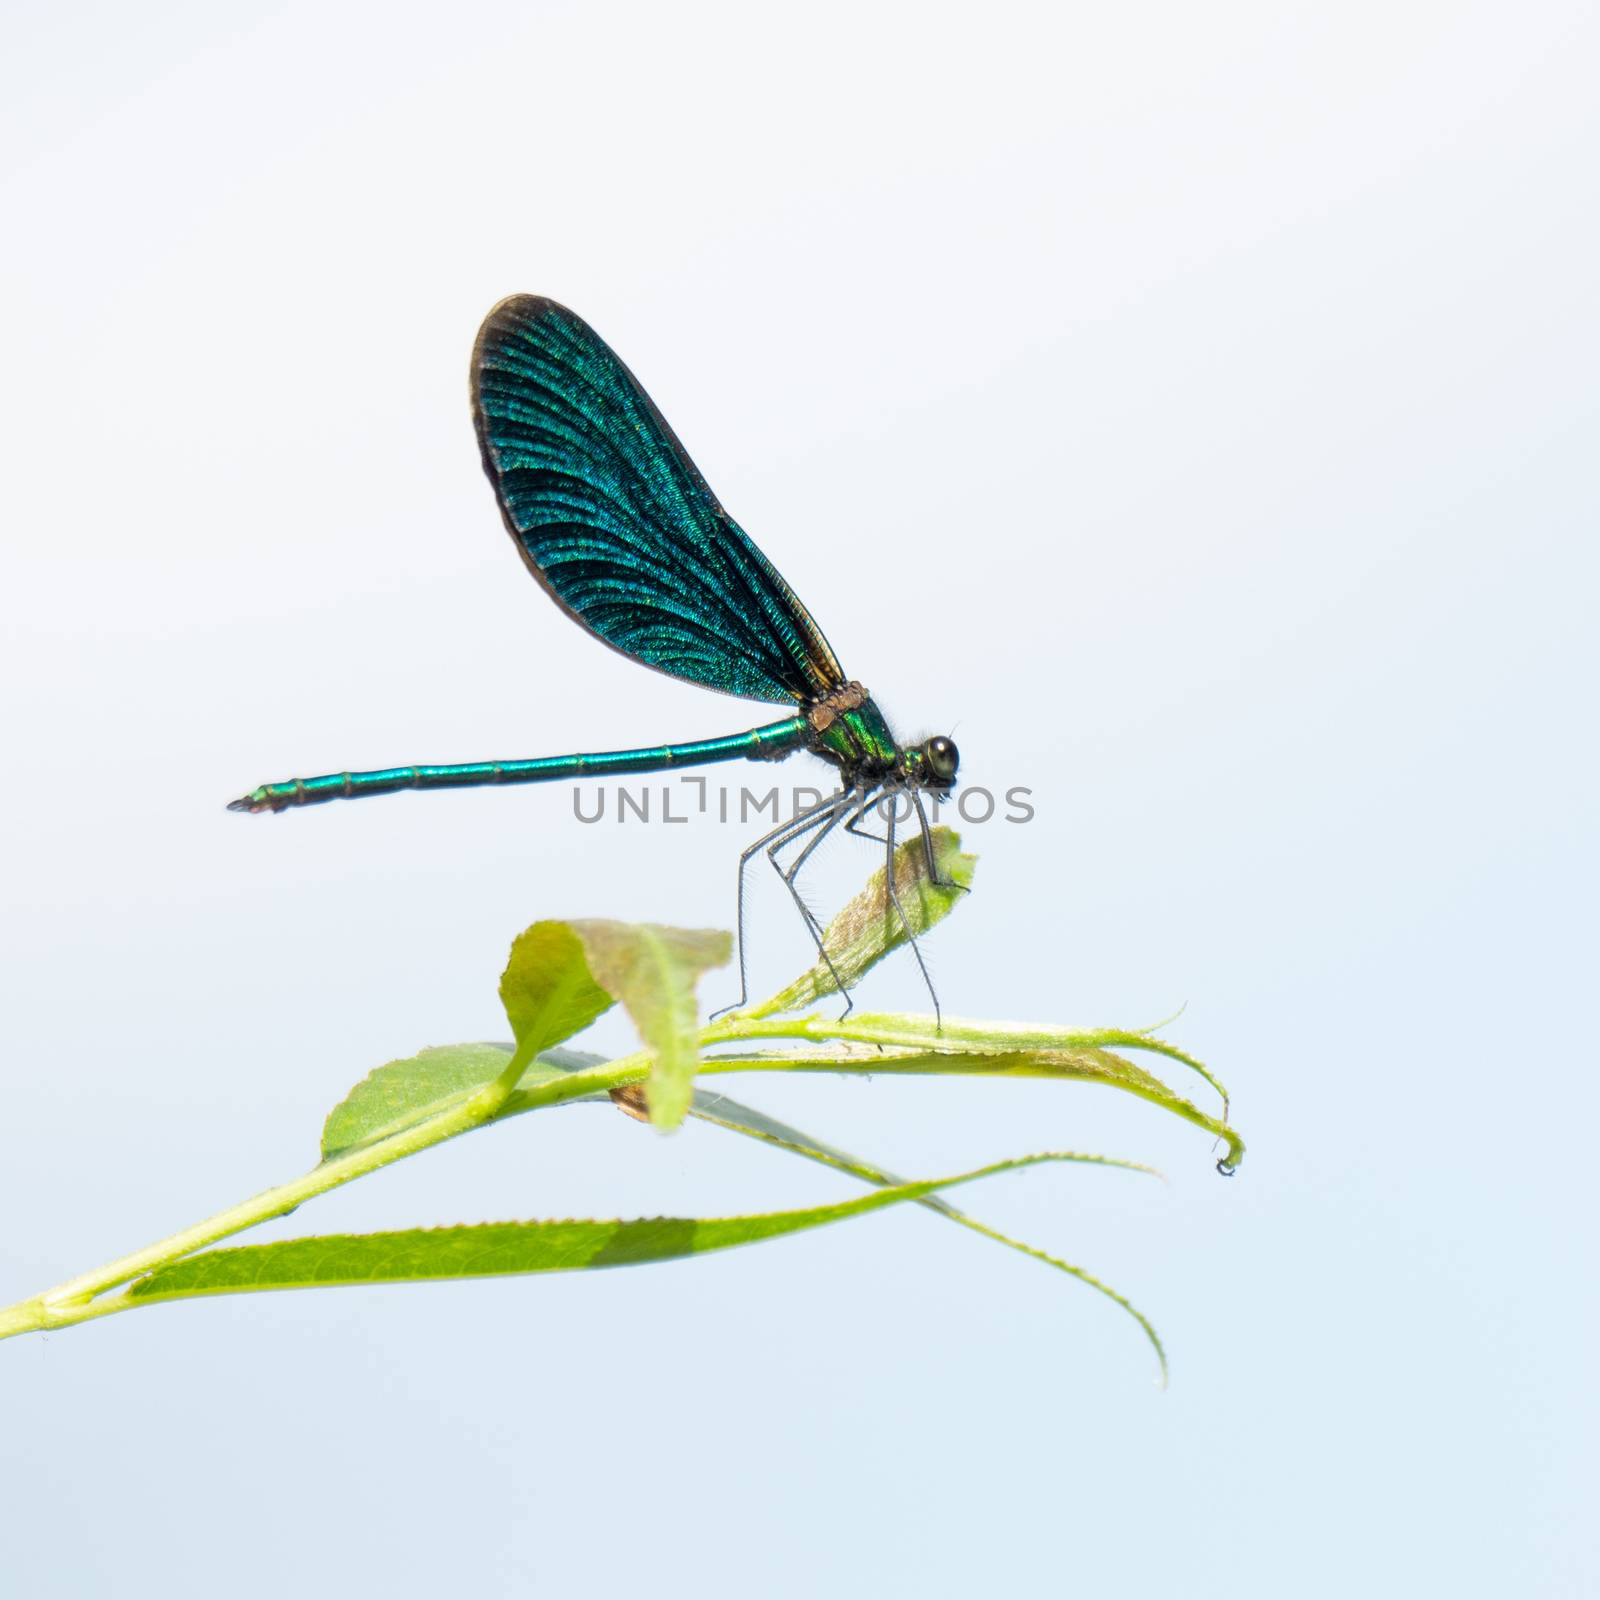 An image of a beautiful dragonfly insect with space for your content